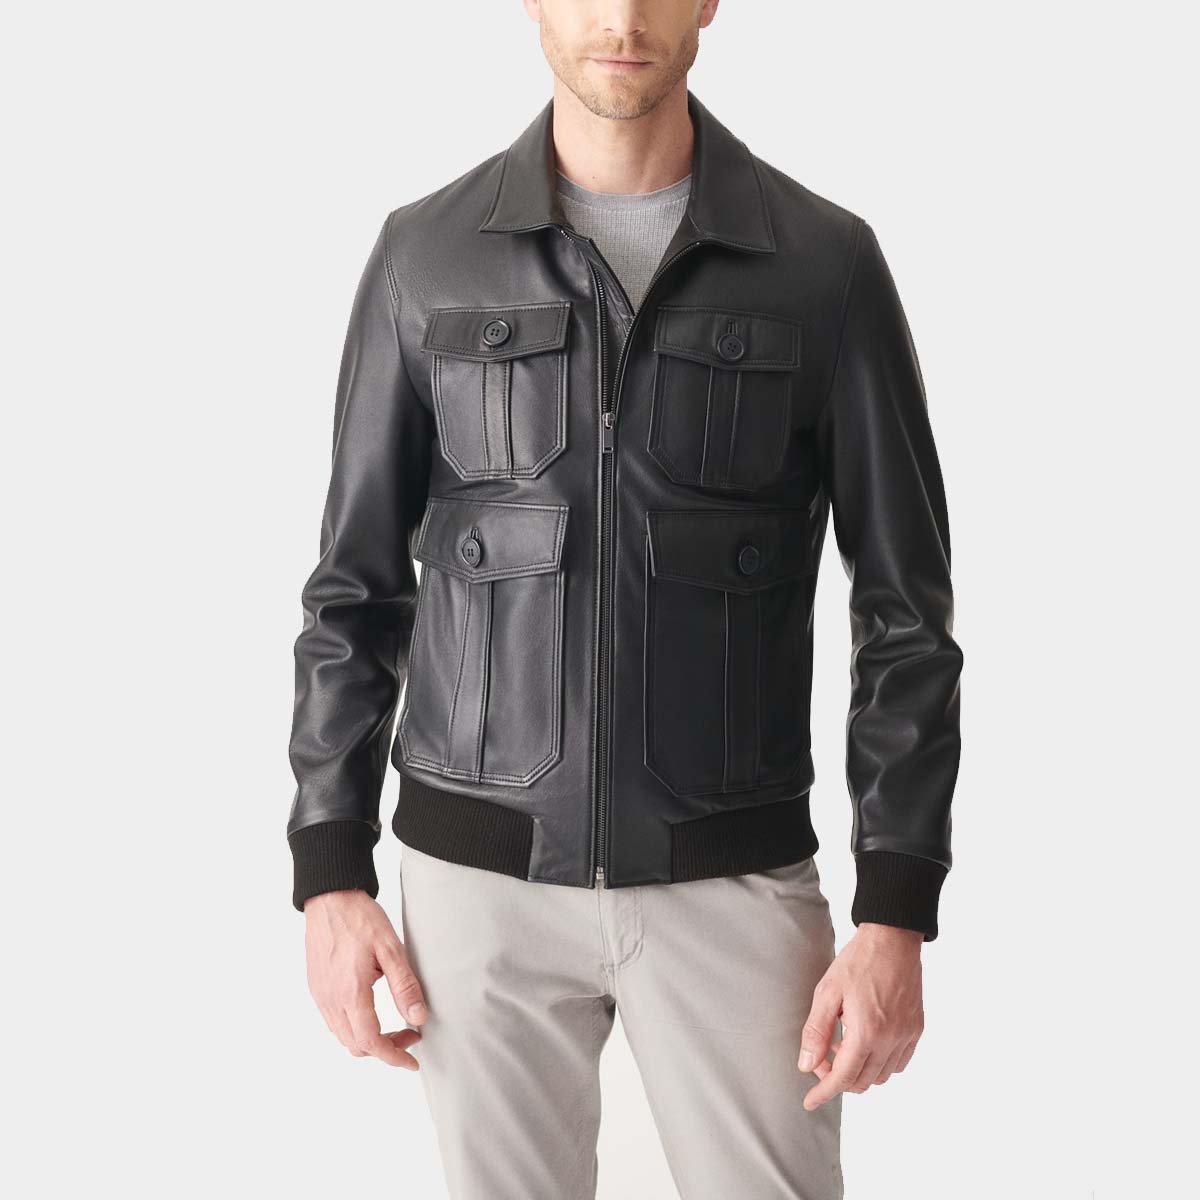 Pouch Pocket Leather Jacket